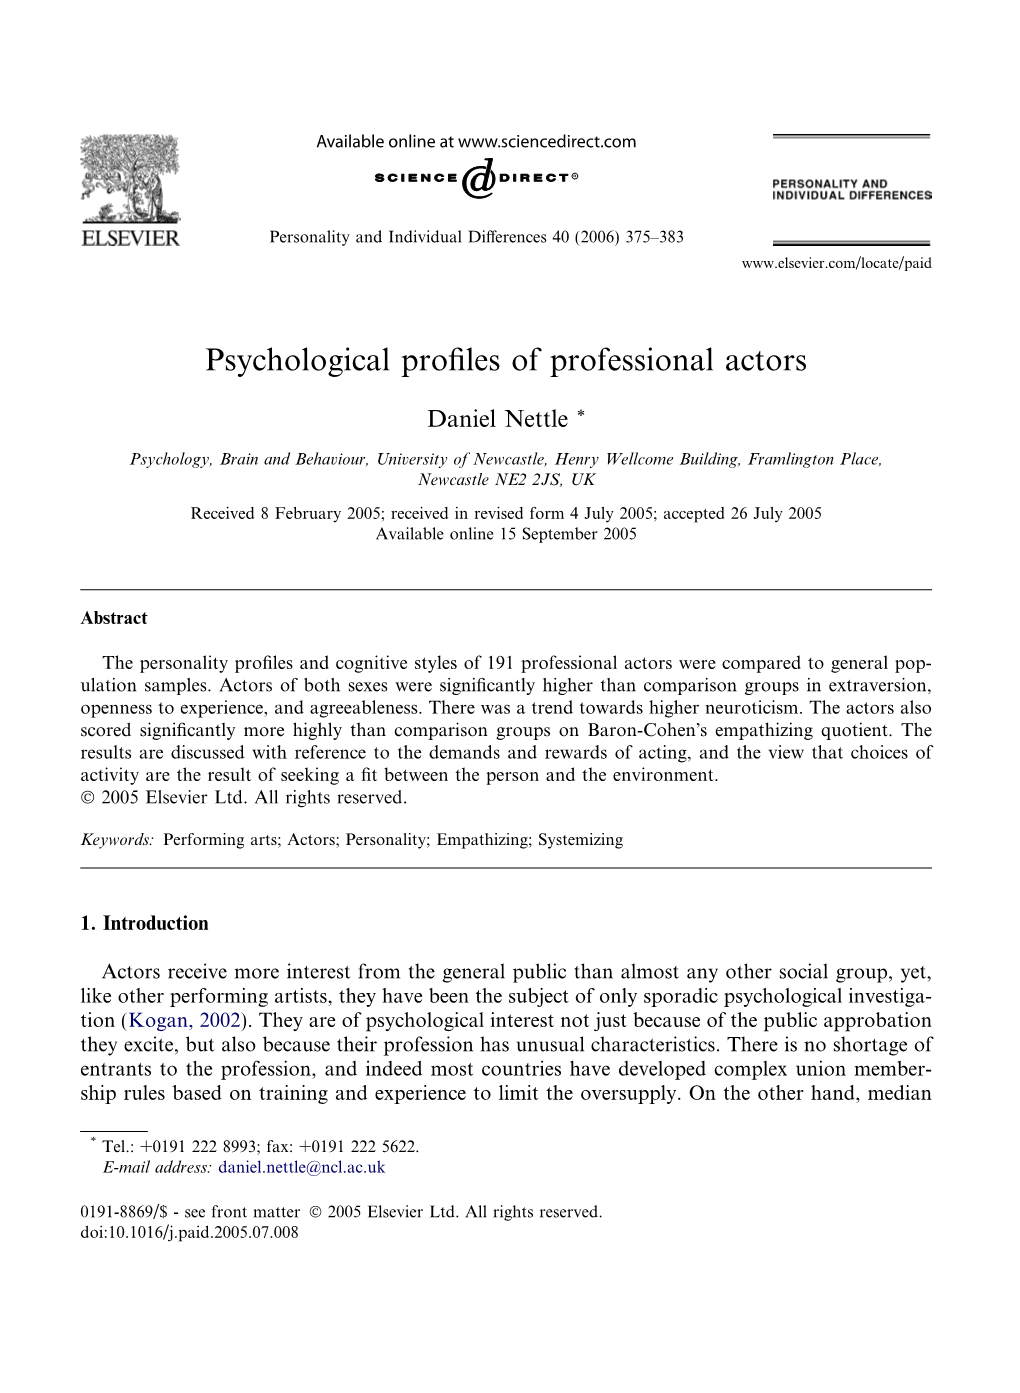 Psychological Profiles of Professional Actors